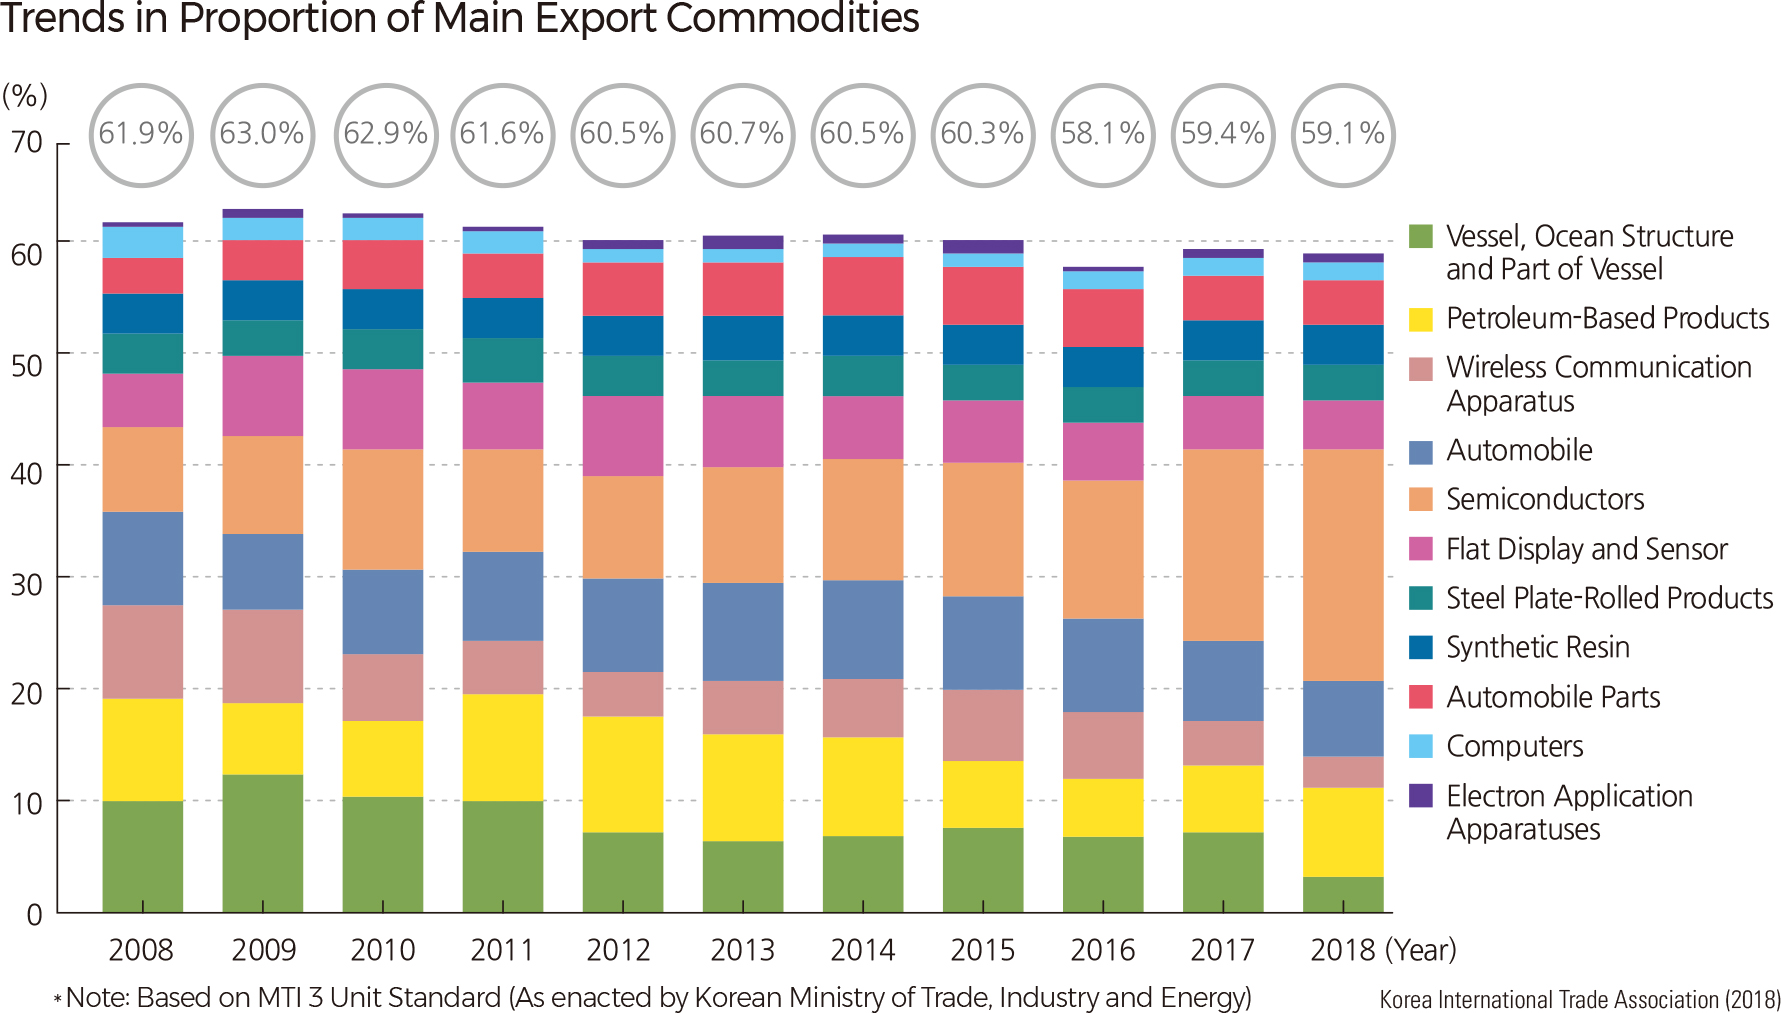 Trends in Proportion of Main Export Commodities